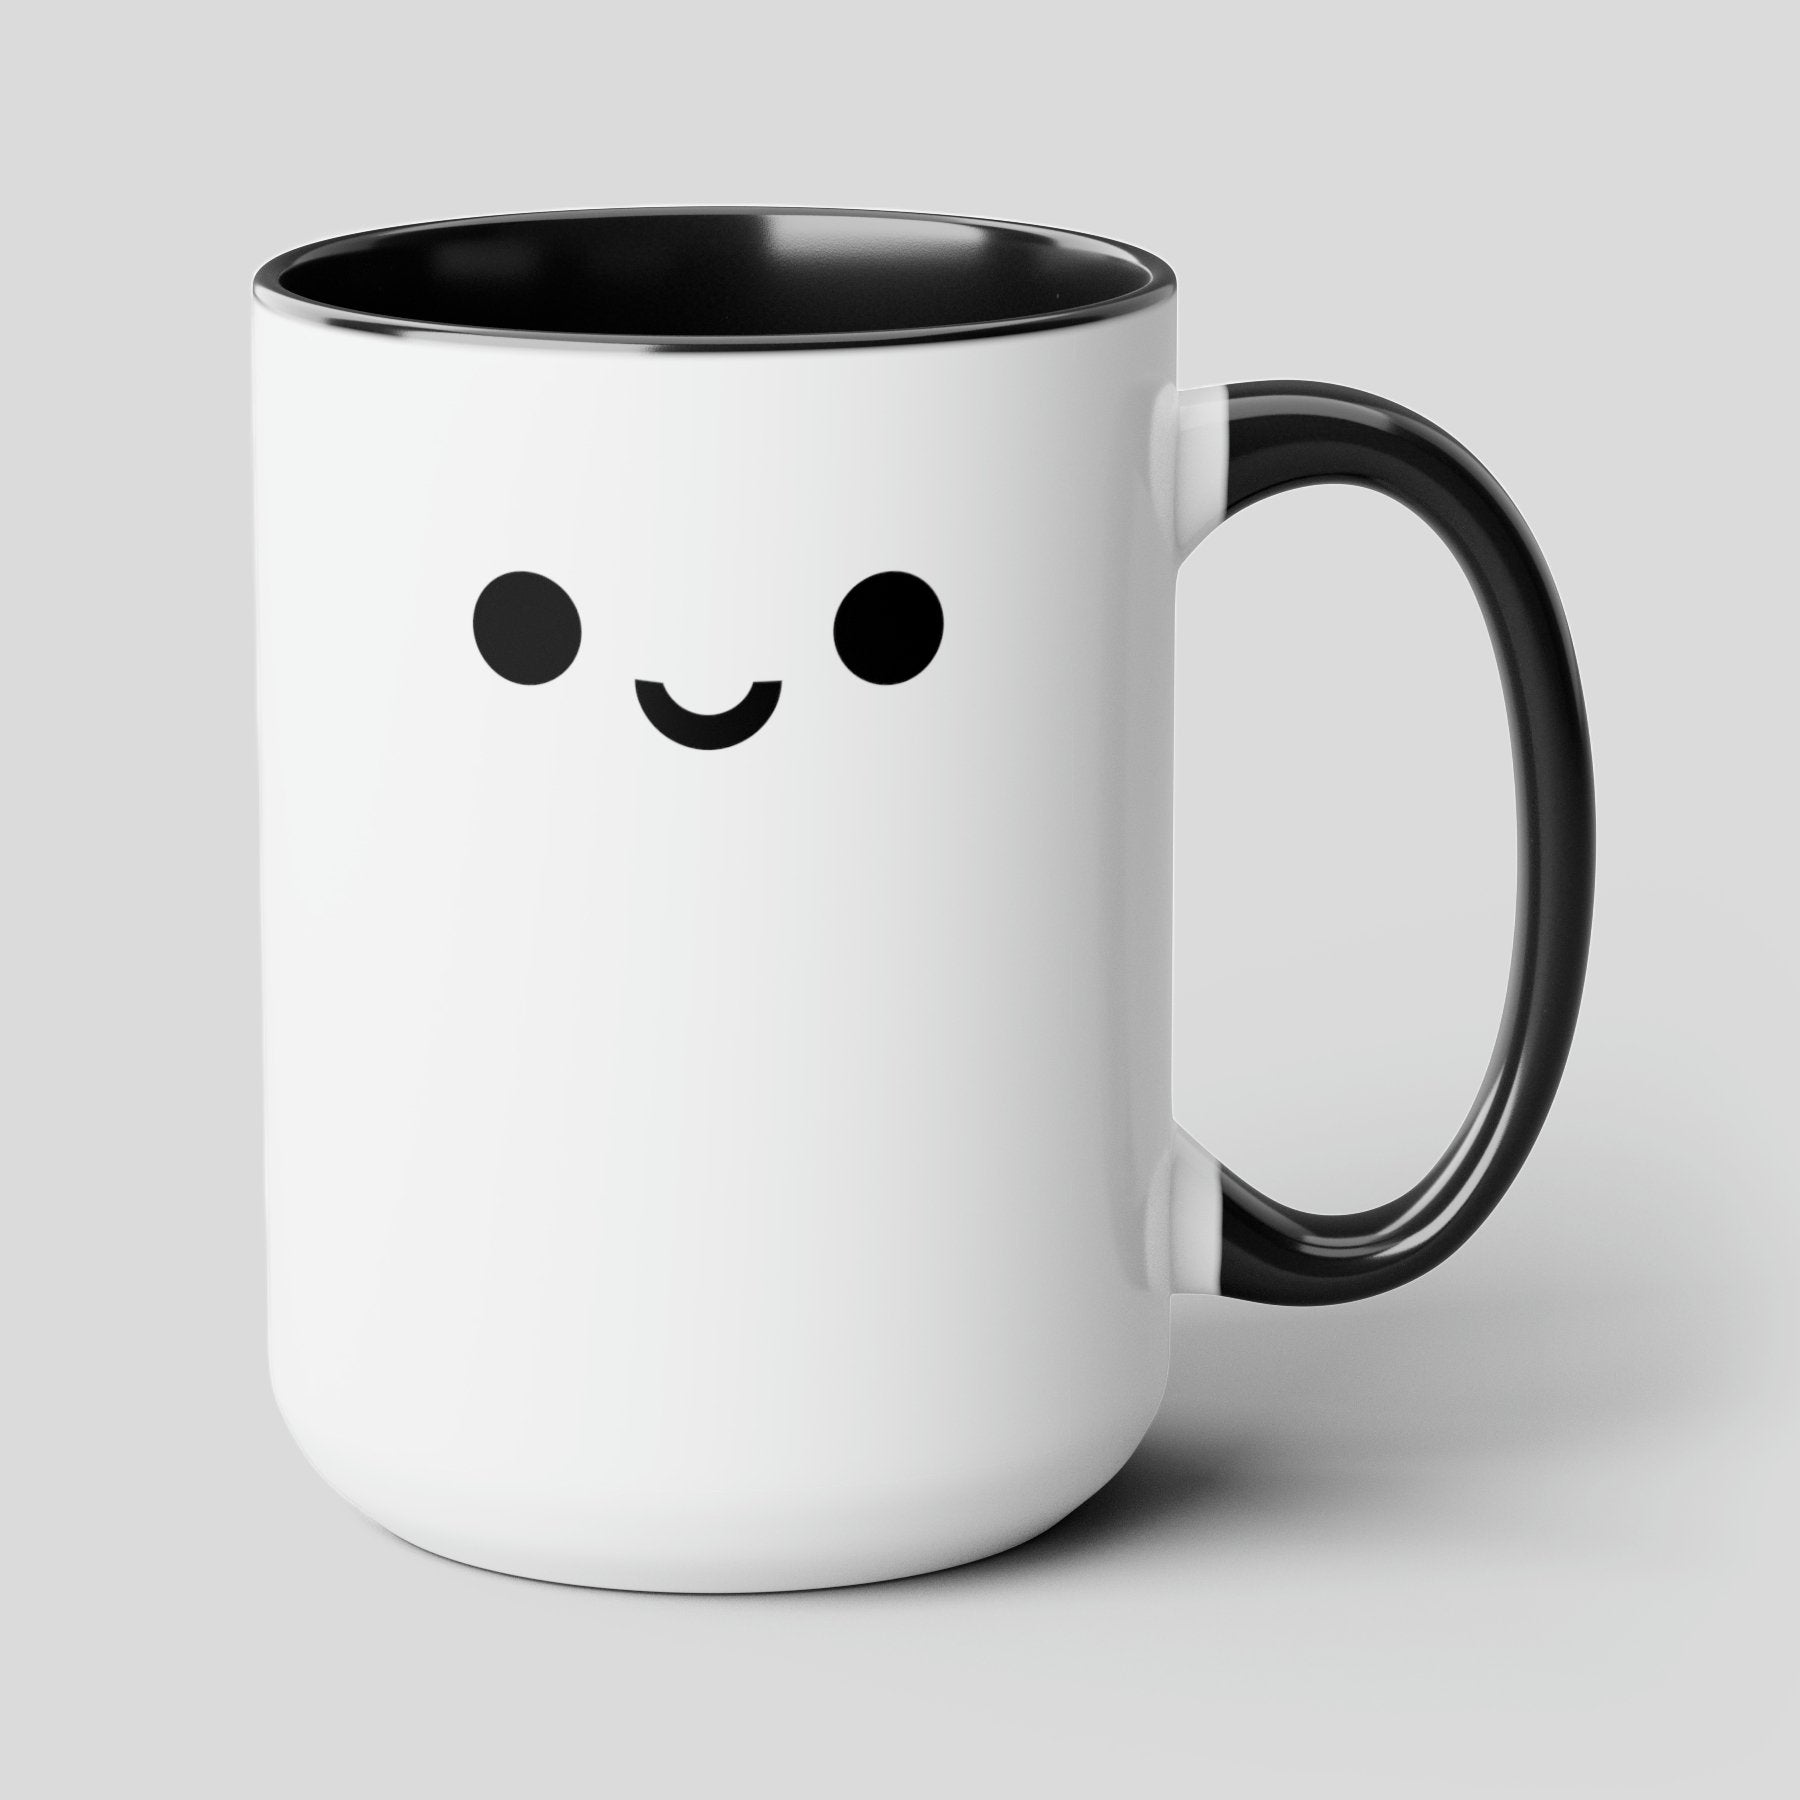 Cute Face 15oz white with black accent funny large coffee mug gift for mental health adorable friend smiling smiley kawaii face waveywares wavey wares wavywares wavy wares cover